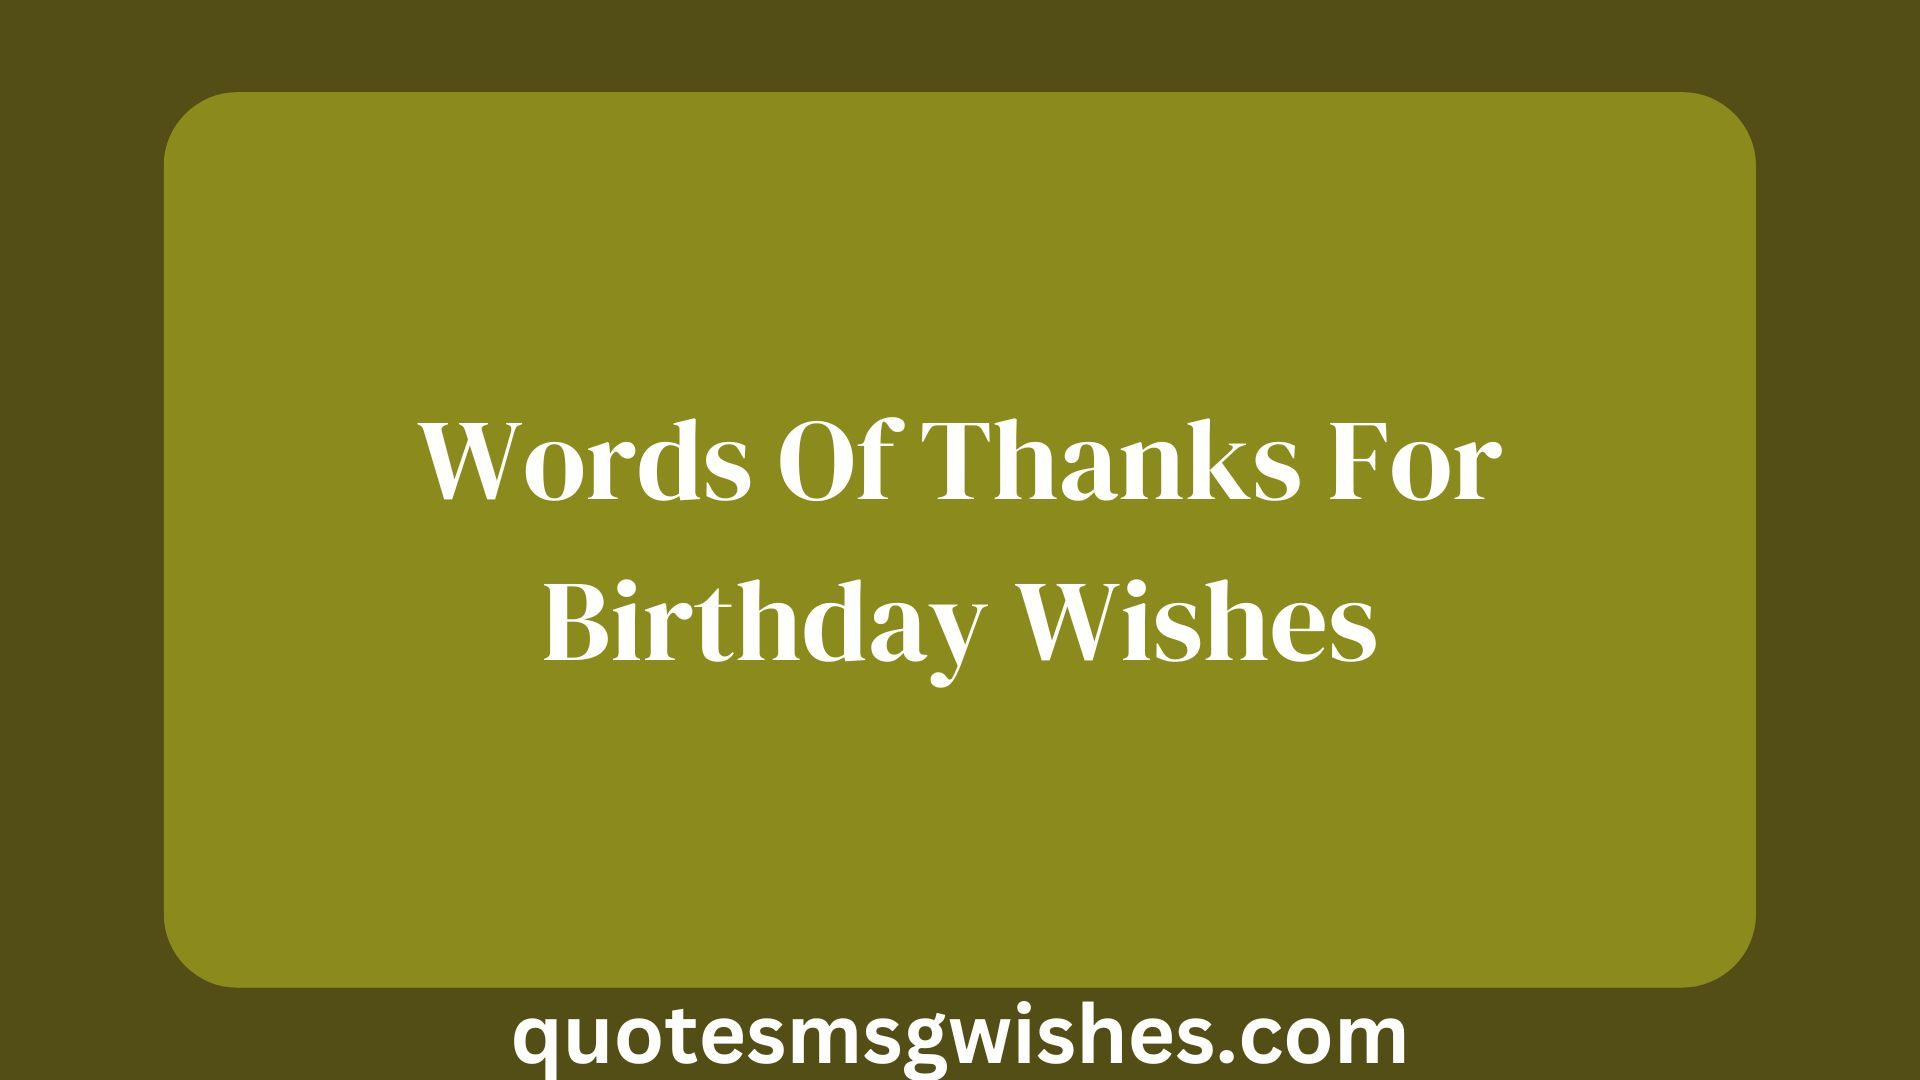 Words Of Thanks For Birthday Wishes